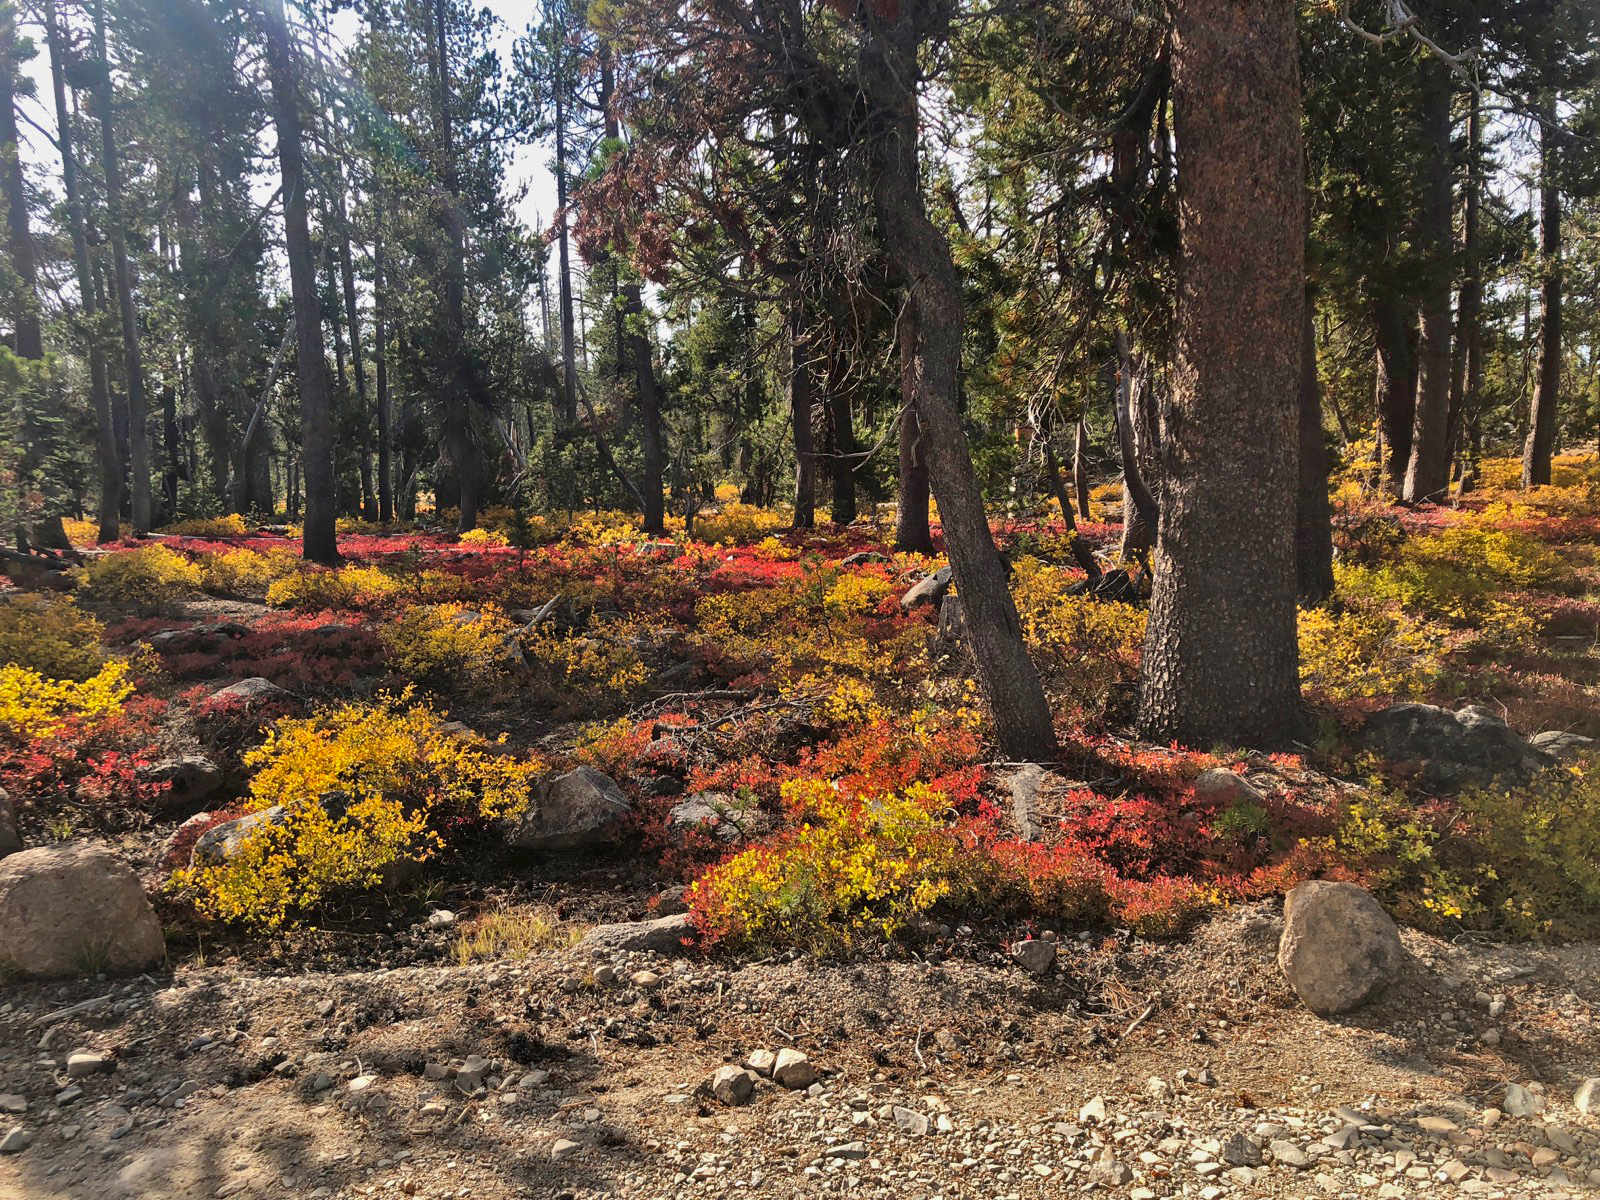 Fall color on the forest floor at Royal Gorge.